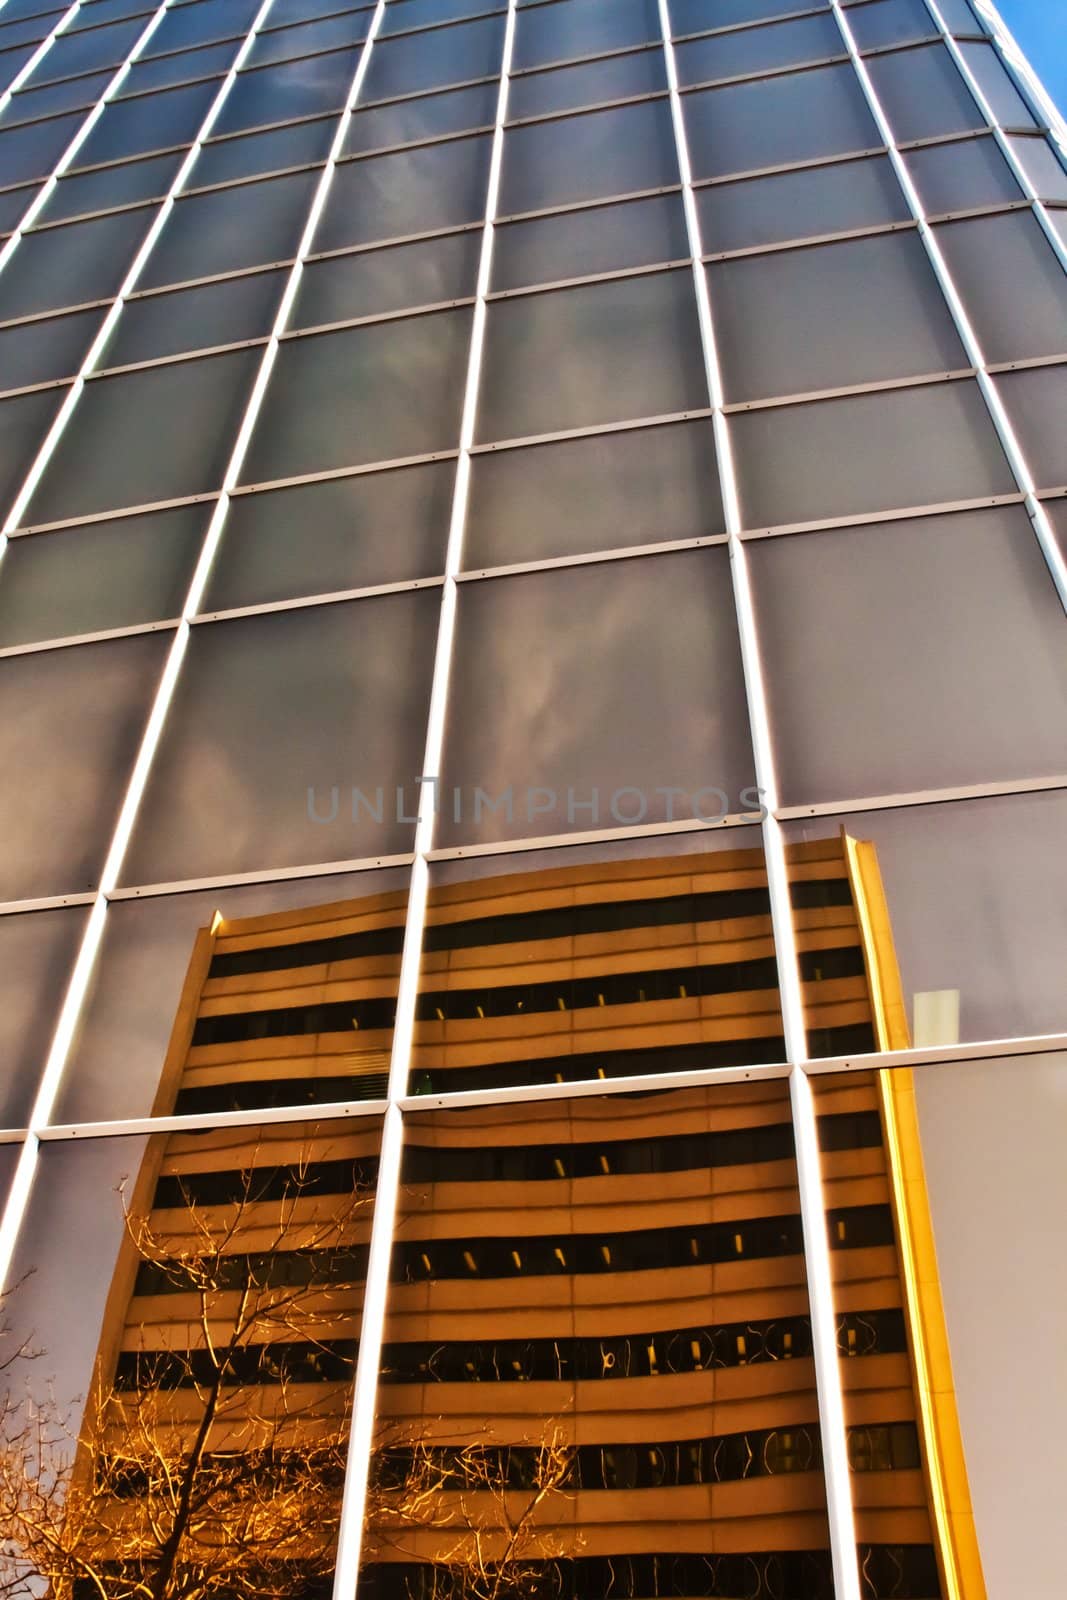 a city building with mirror-like reflections of the neighbouring building